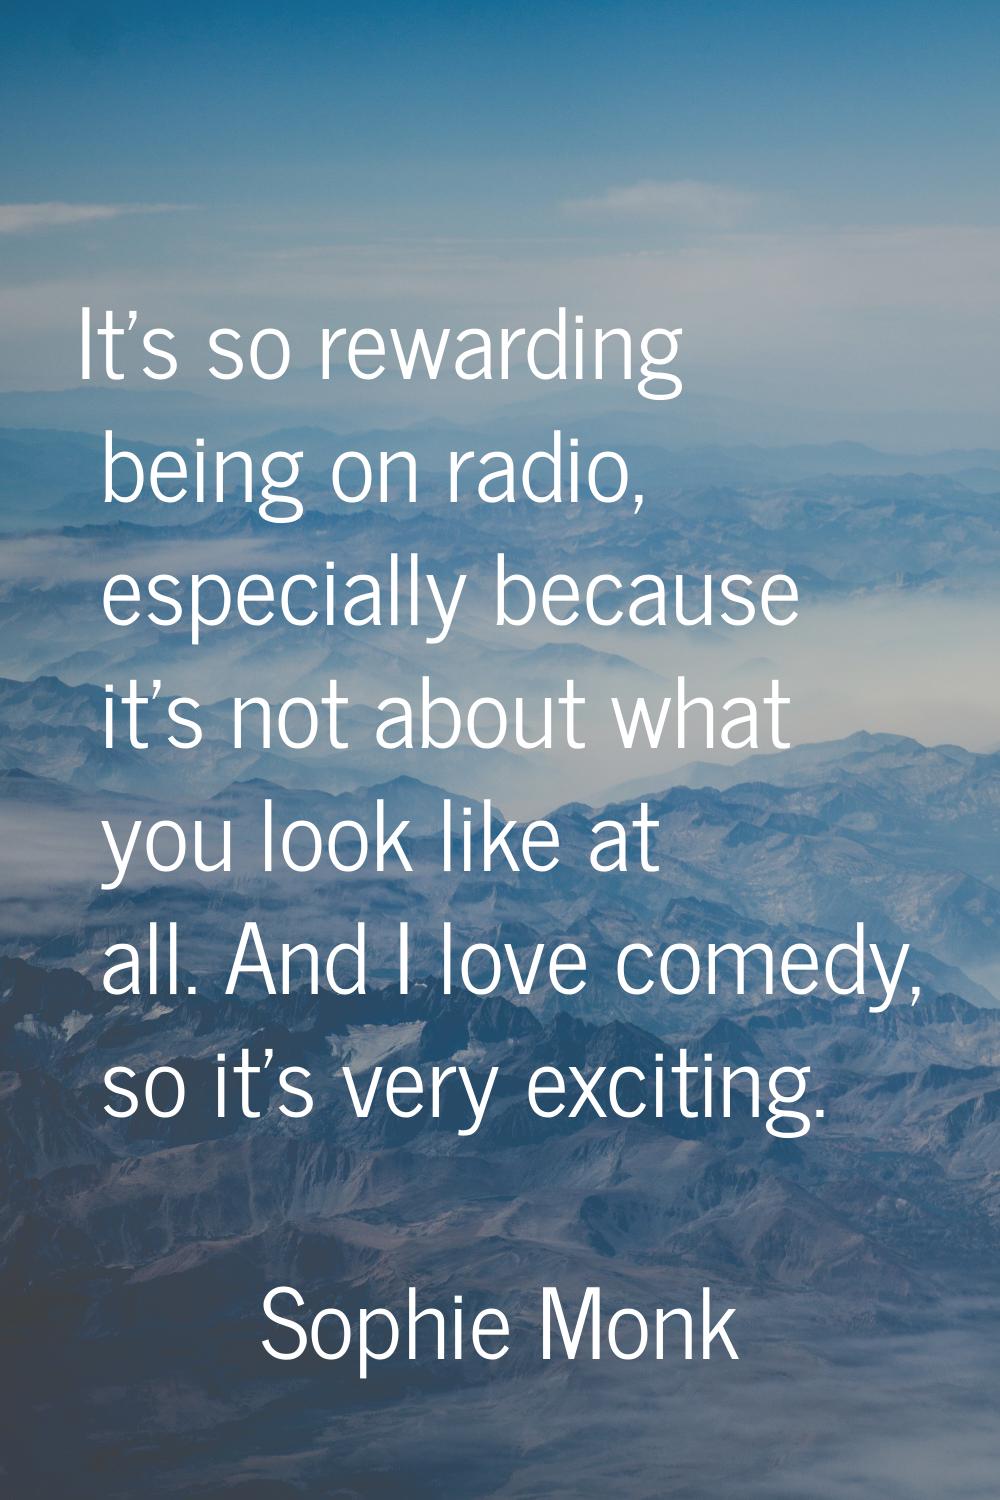 It's so rewarding being on radio, especially because it's not about what you look like at all. And 